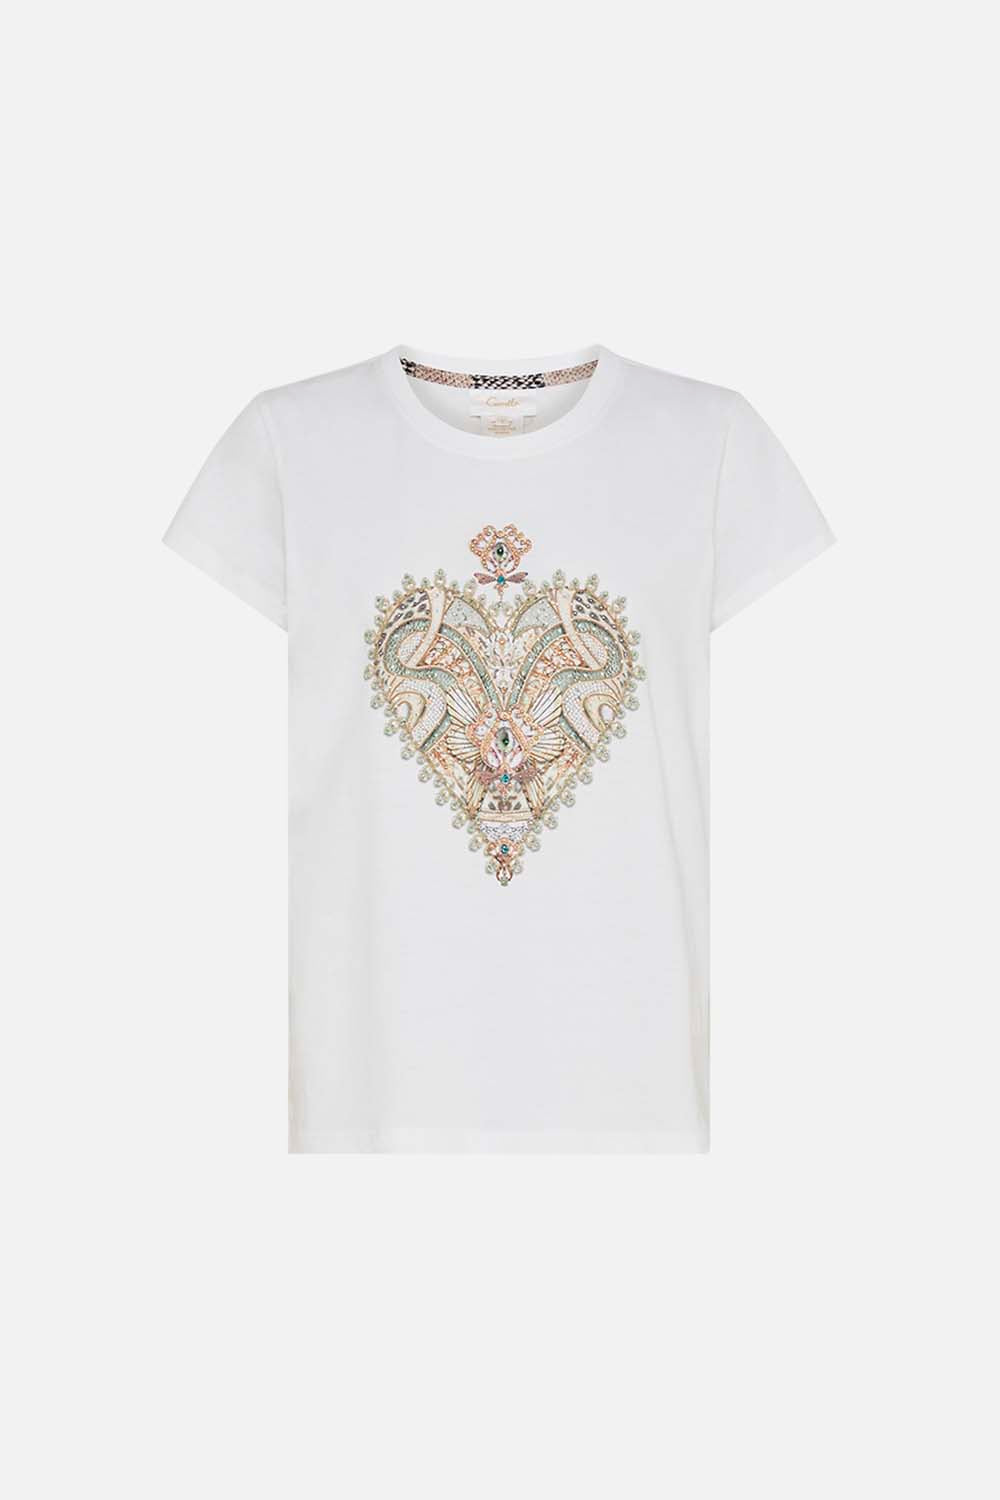 CAMILLA white graphic print t shirt Looking Glass Houses print